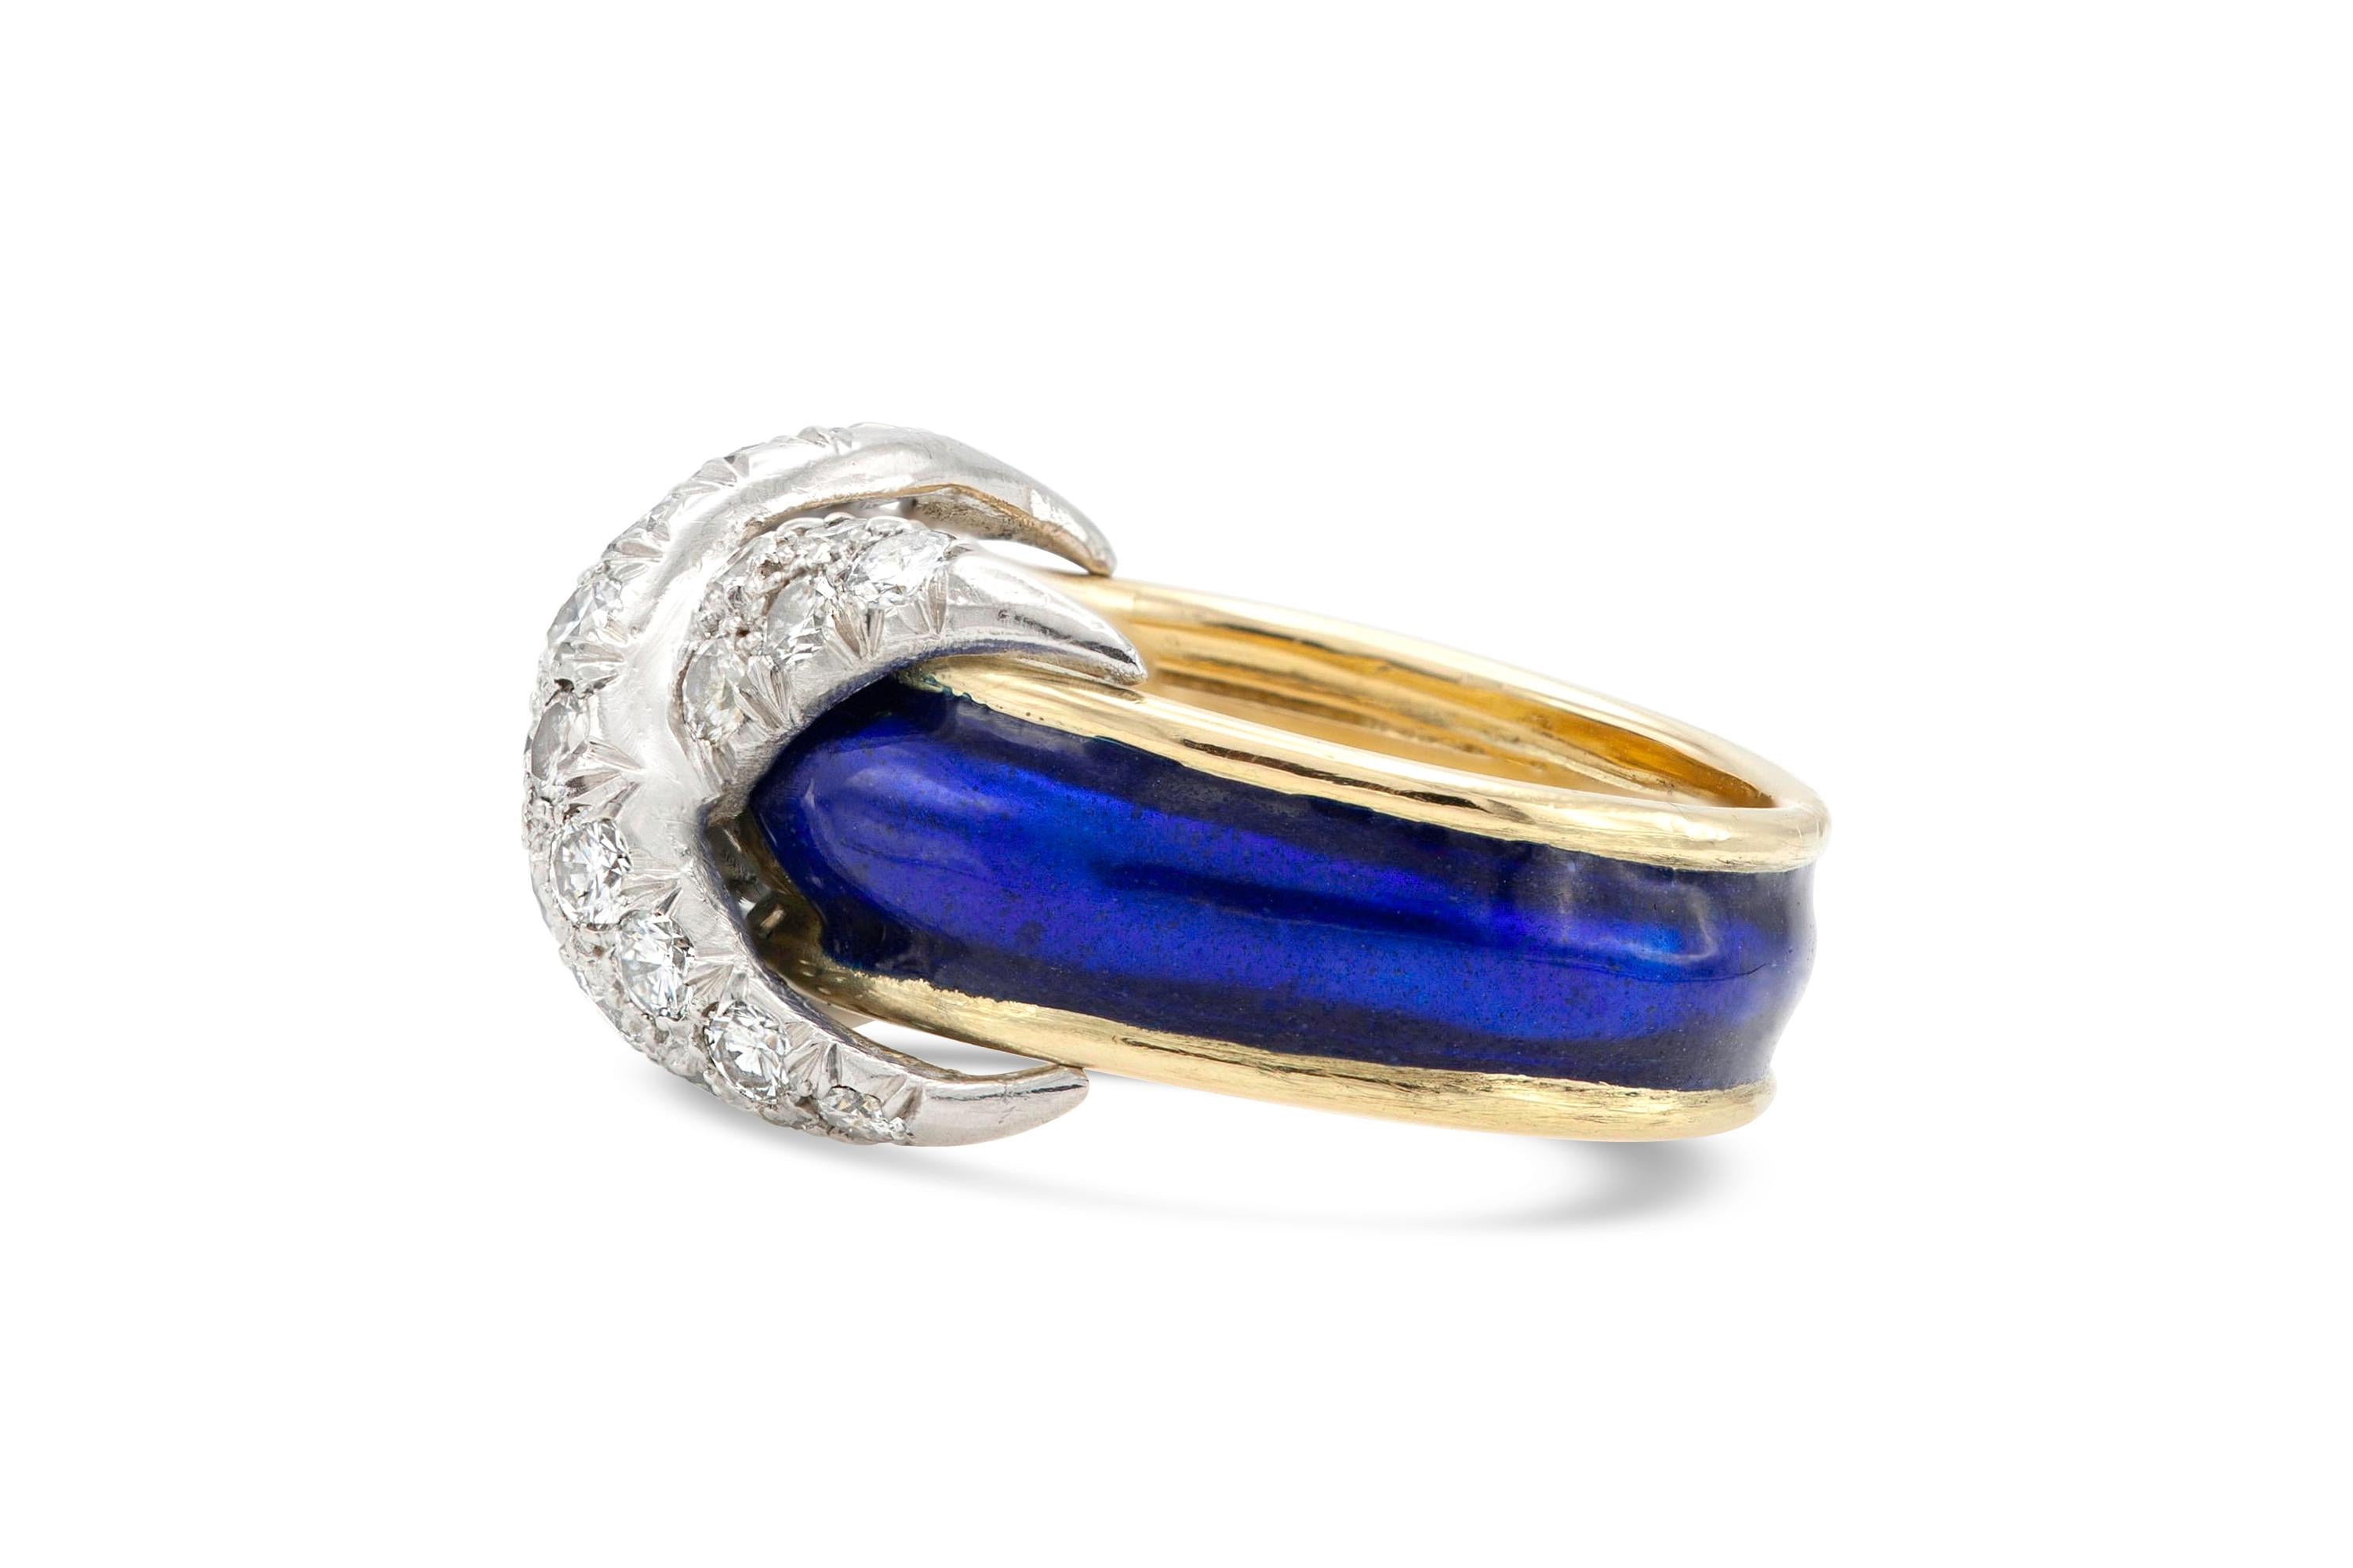 Finely crafted in 18K gold and platinum with blue enamel and pavé round-cut diamonds weighing a total of 0.85 carat. Signed Schlumberger and Tiffany & Co.
